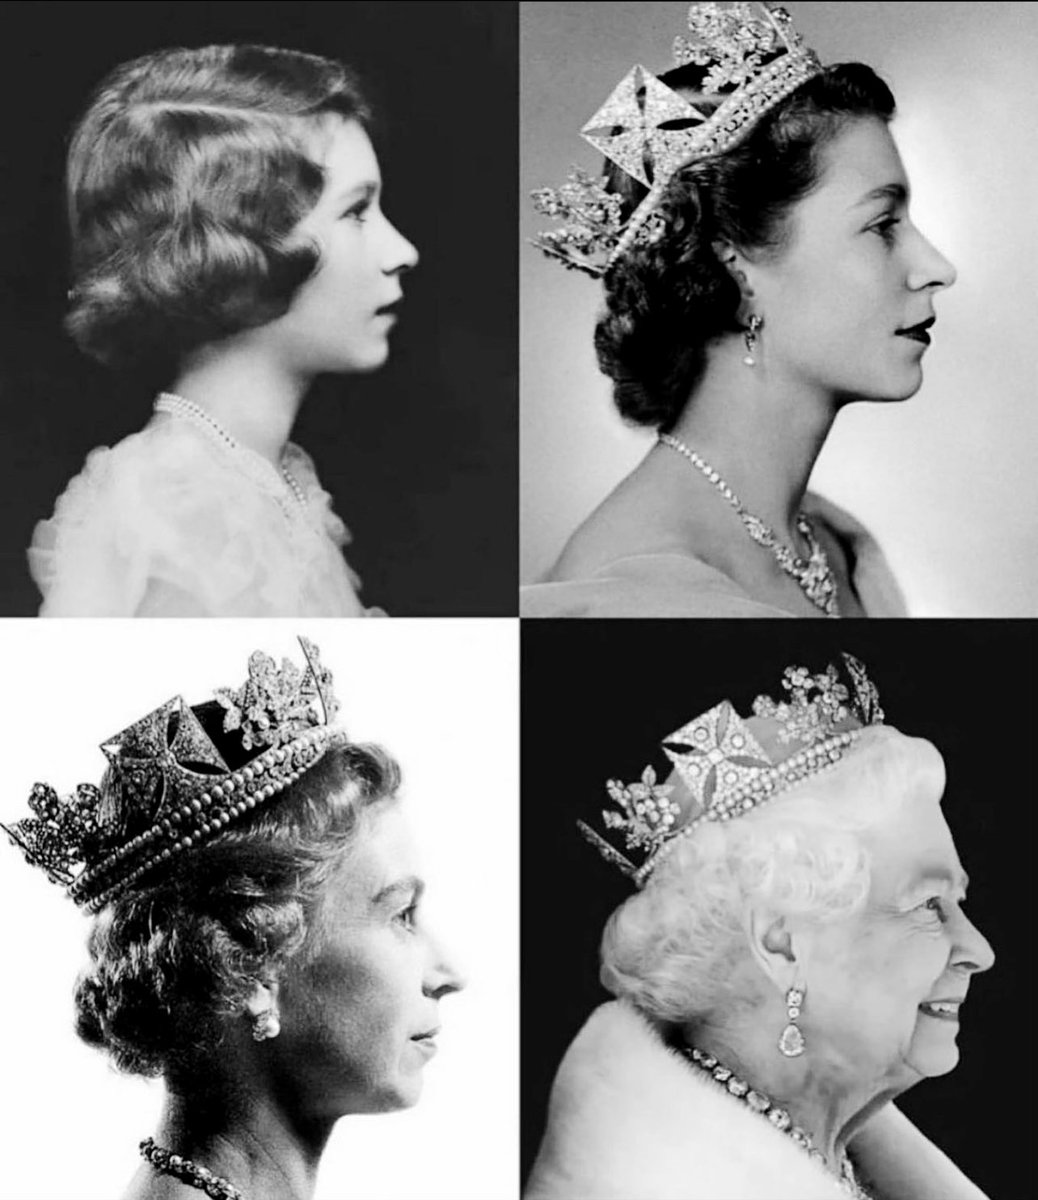 Timeless. Fierce. Dignified. Loved. 
From Elizabeth the child to
Elizabeth the Great. #QEII 🇬🇧👑